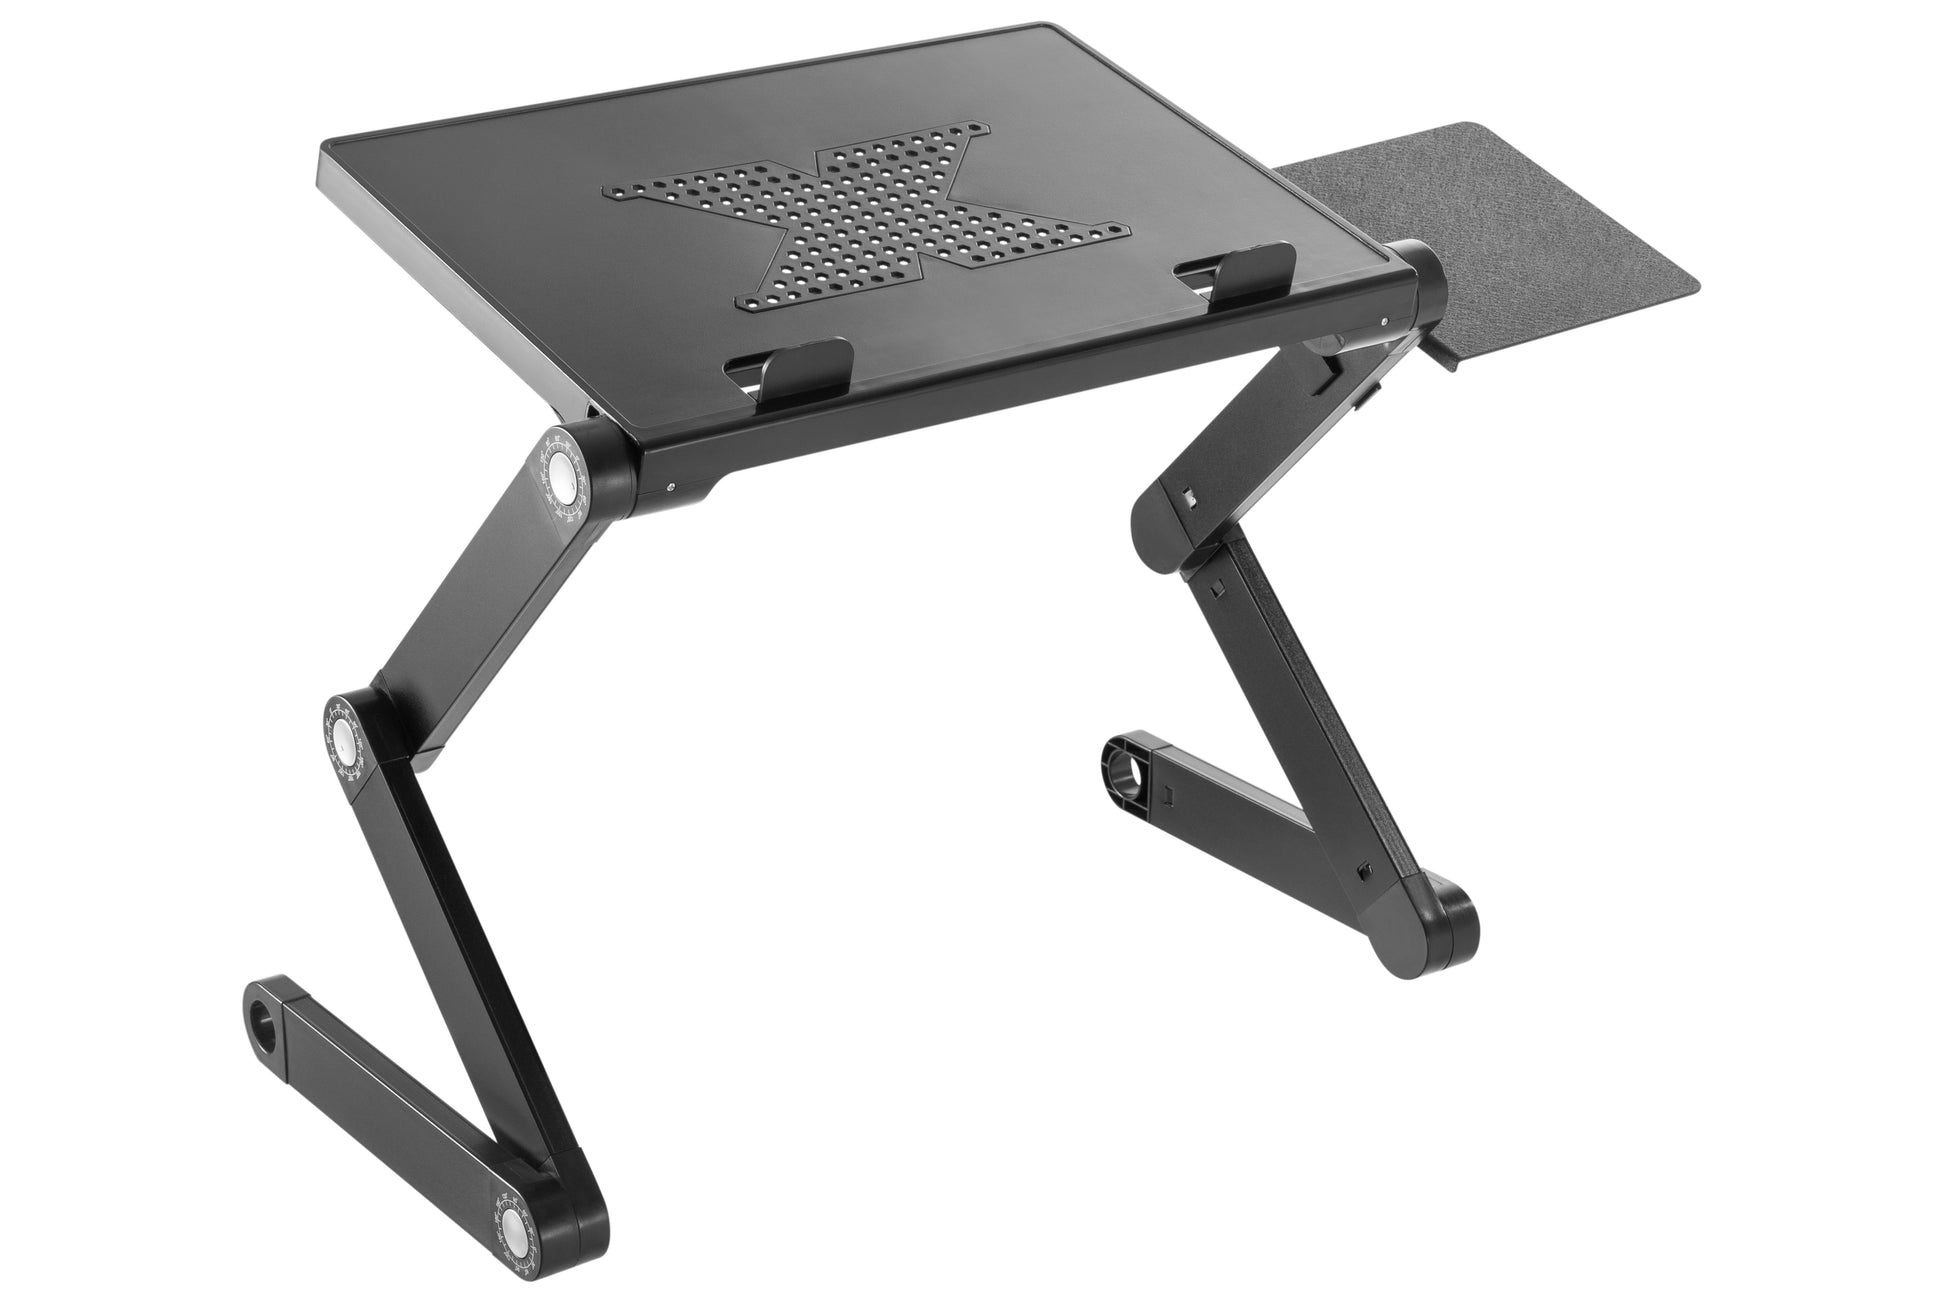 ProperAV Laptop, Tablet or Monitor Riser Stand with Extending Legs & Mouse Pad Side Mount - Black - maplin.co.uk